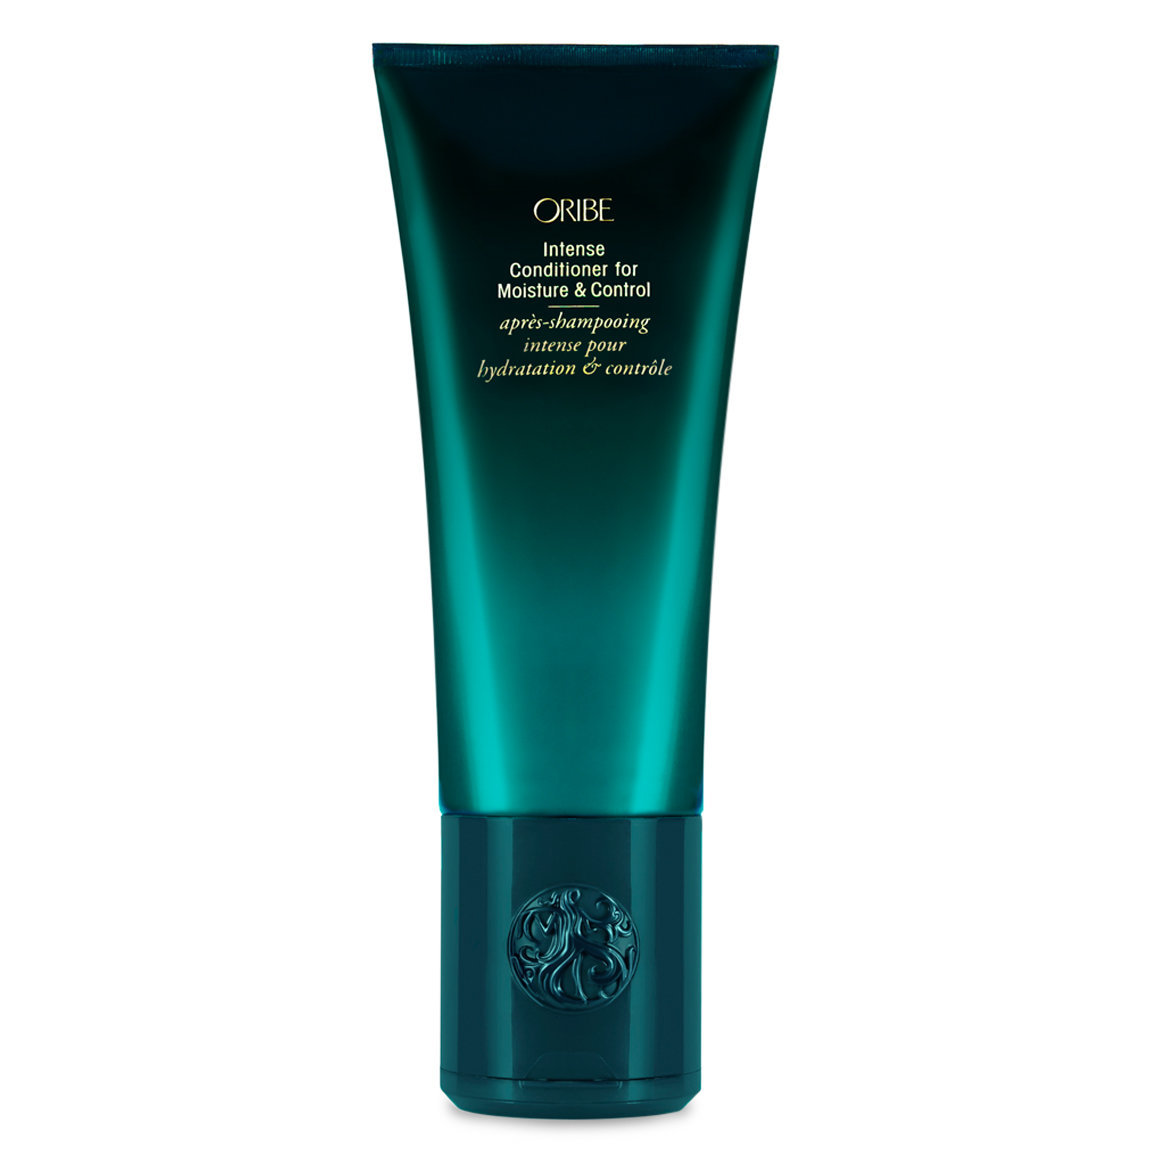 Oribe Intense Conditioner for Moisture & Control alternative view 1 - product swatch.